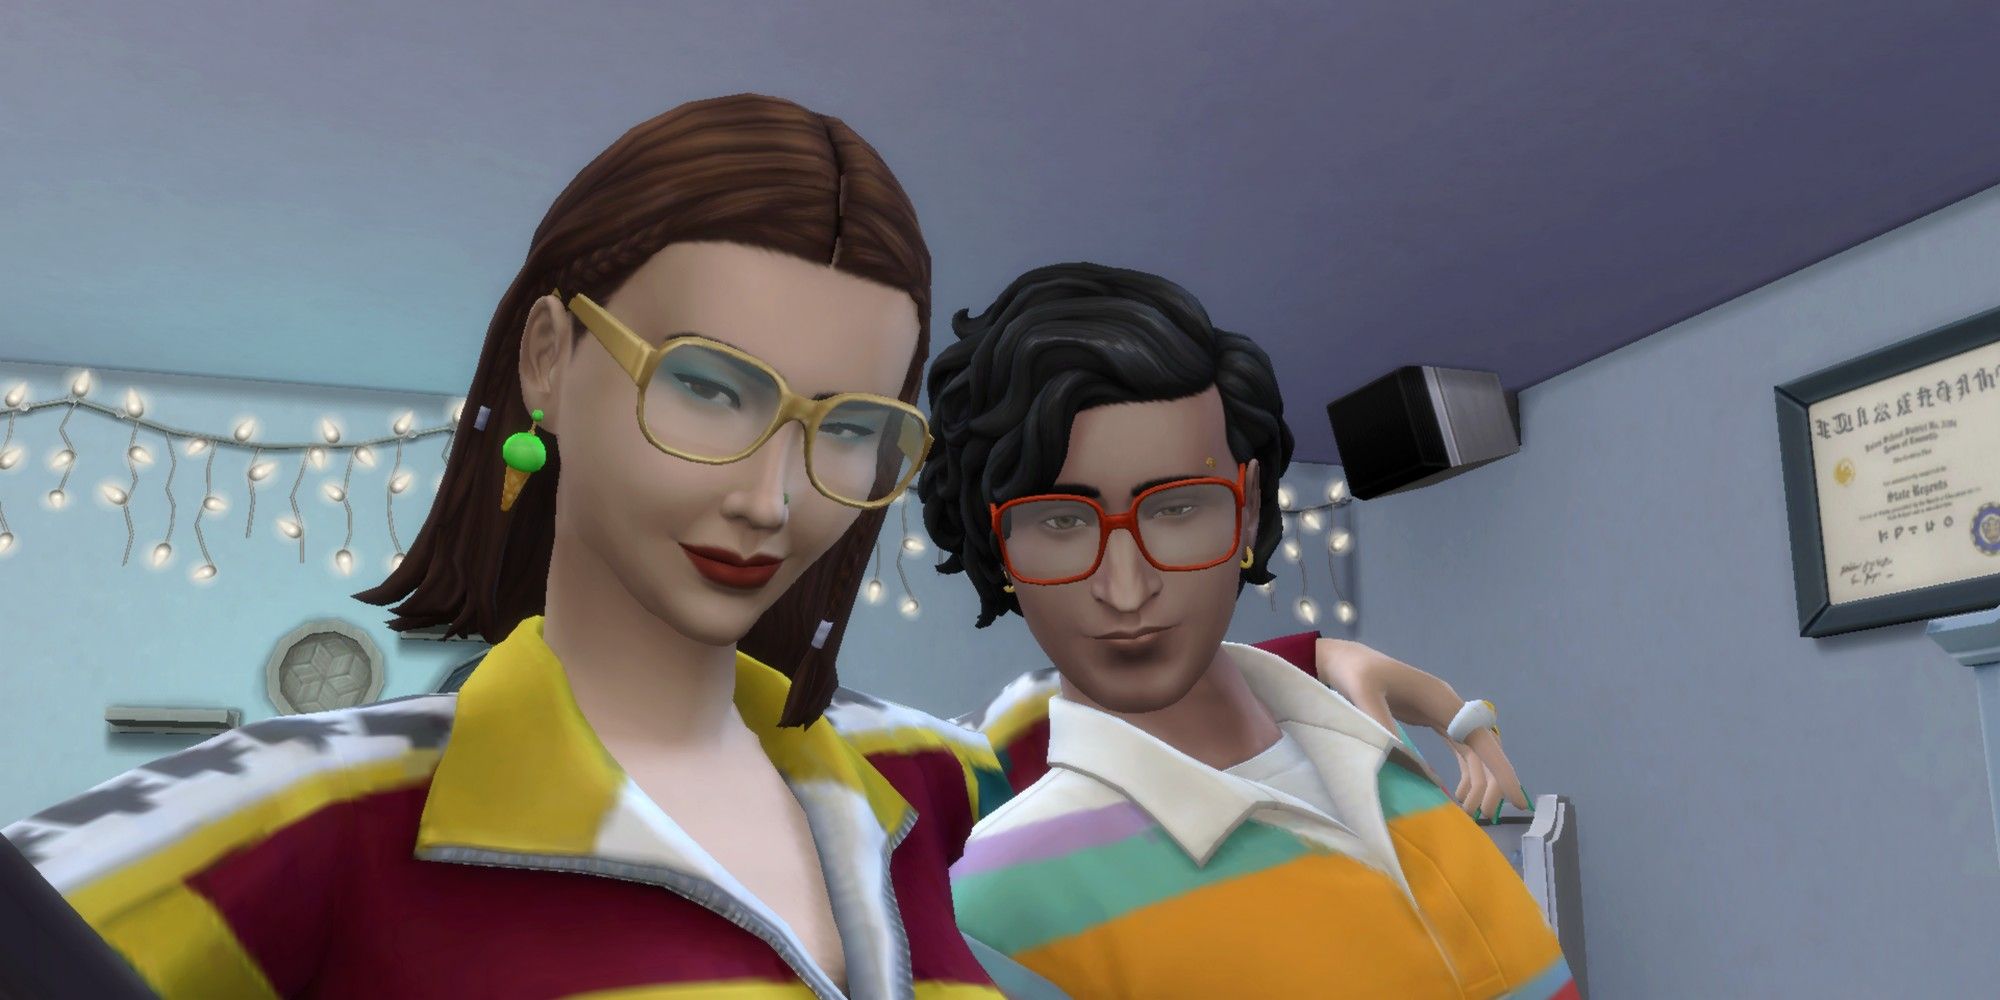 the sims 4 high school years expansion pack selfie selfies friends pose friend